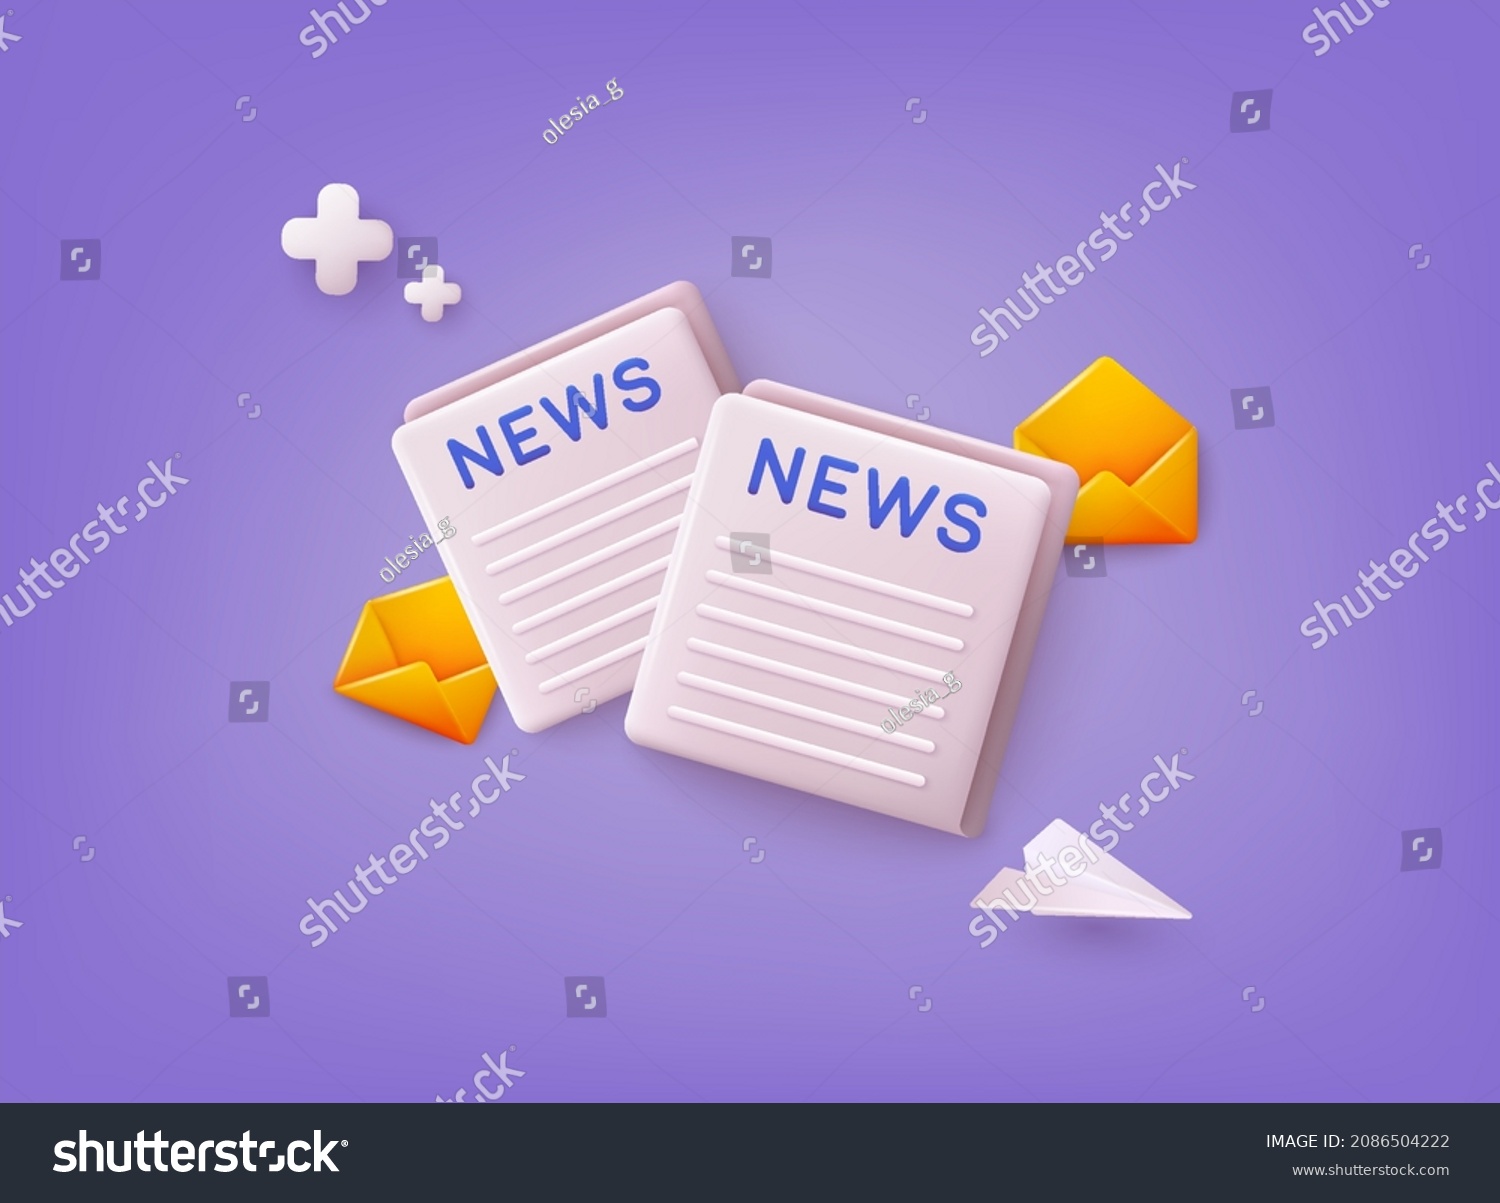 Concept News update. Newspaper icon, information about events, activities, company information and announcements for web page. 3D Web Vector Illustrations.  #2086504222